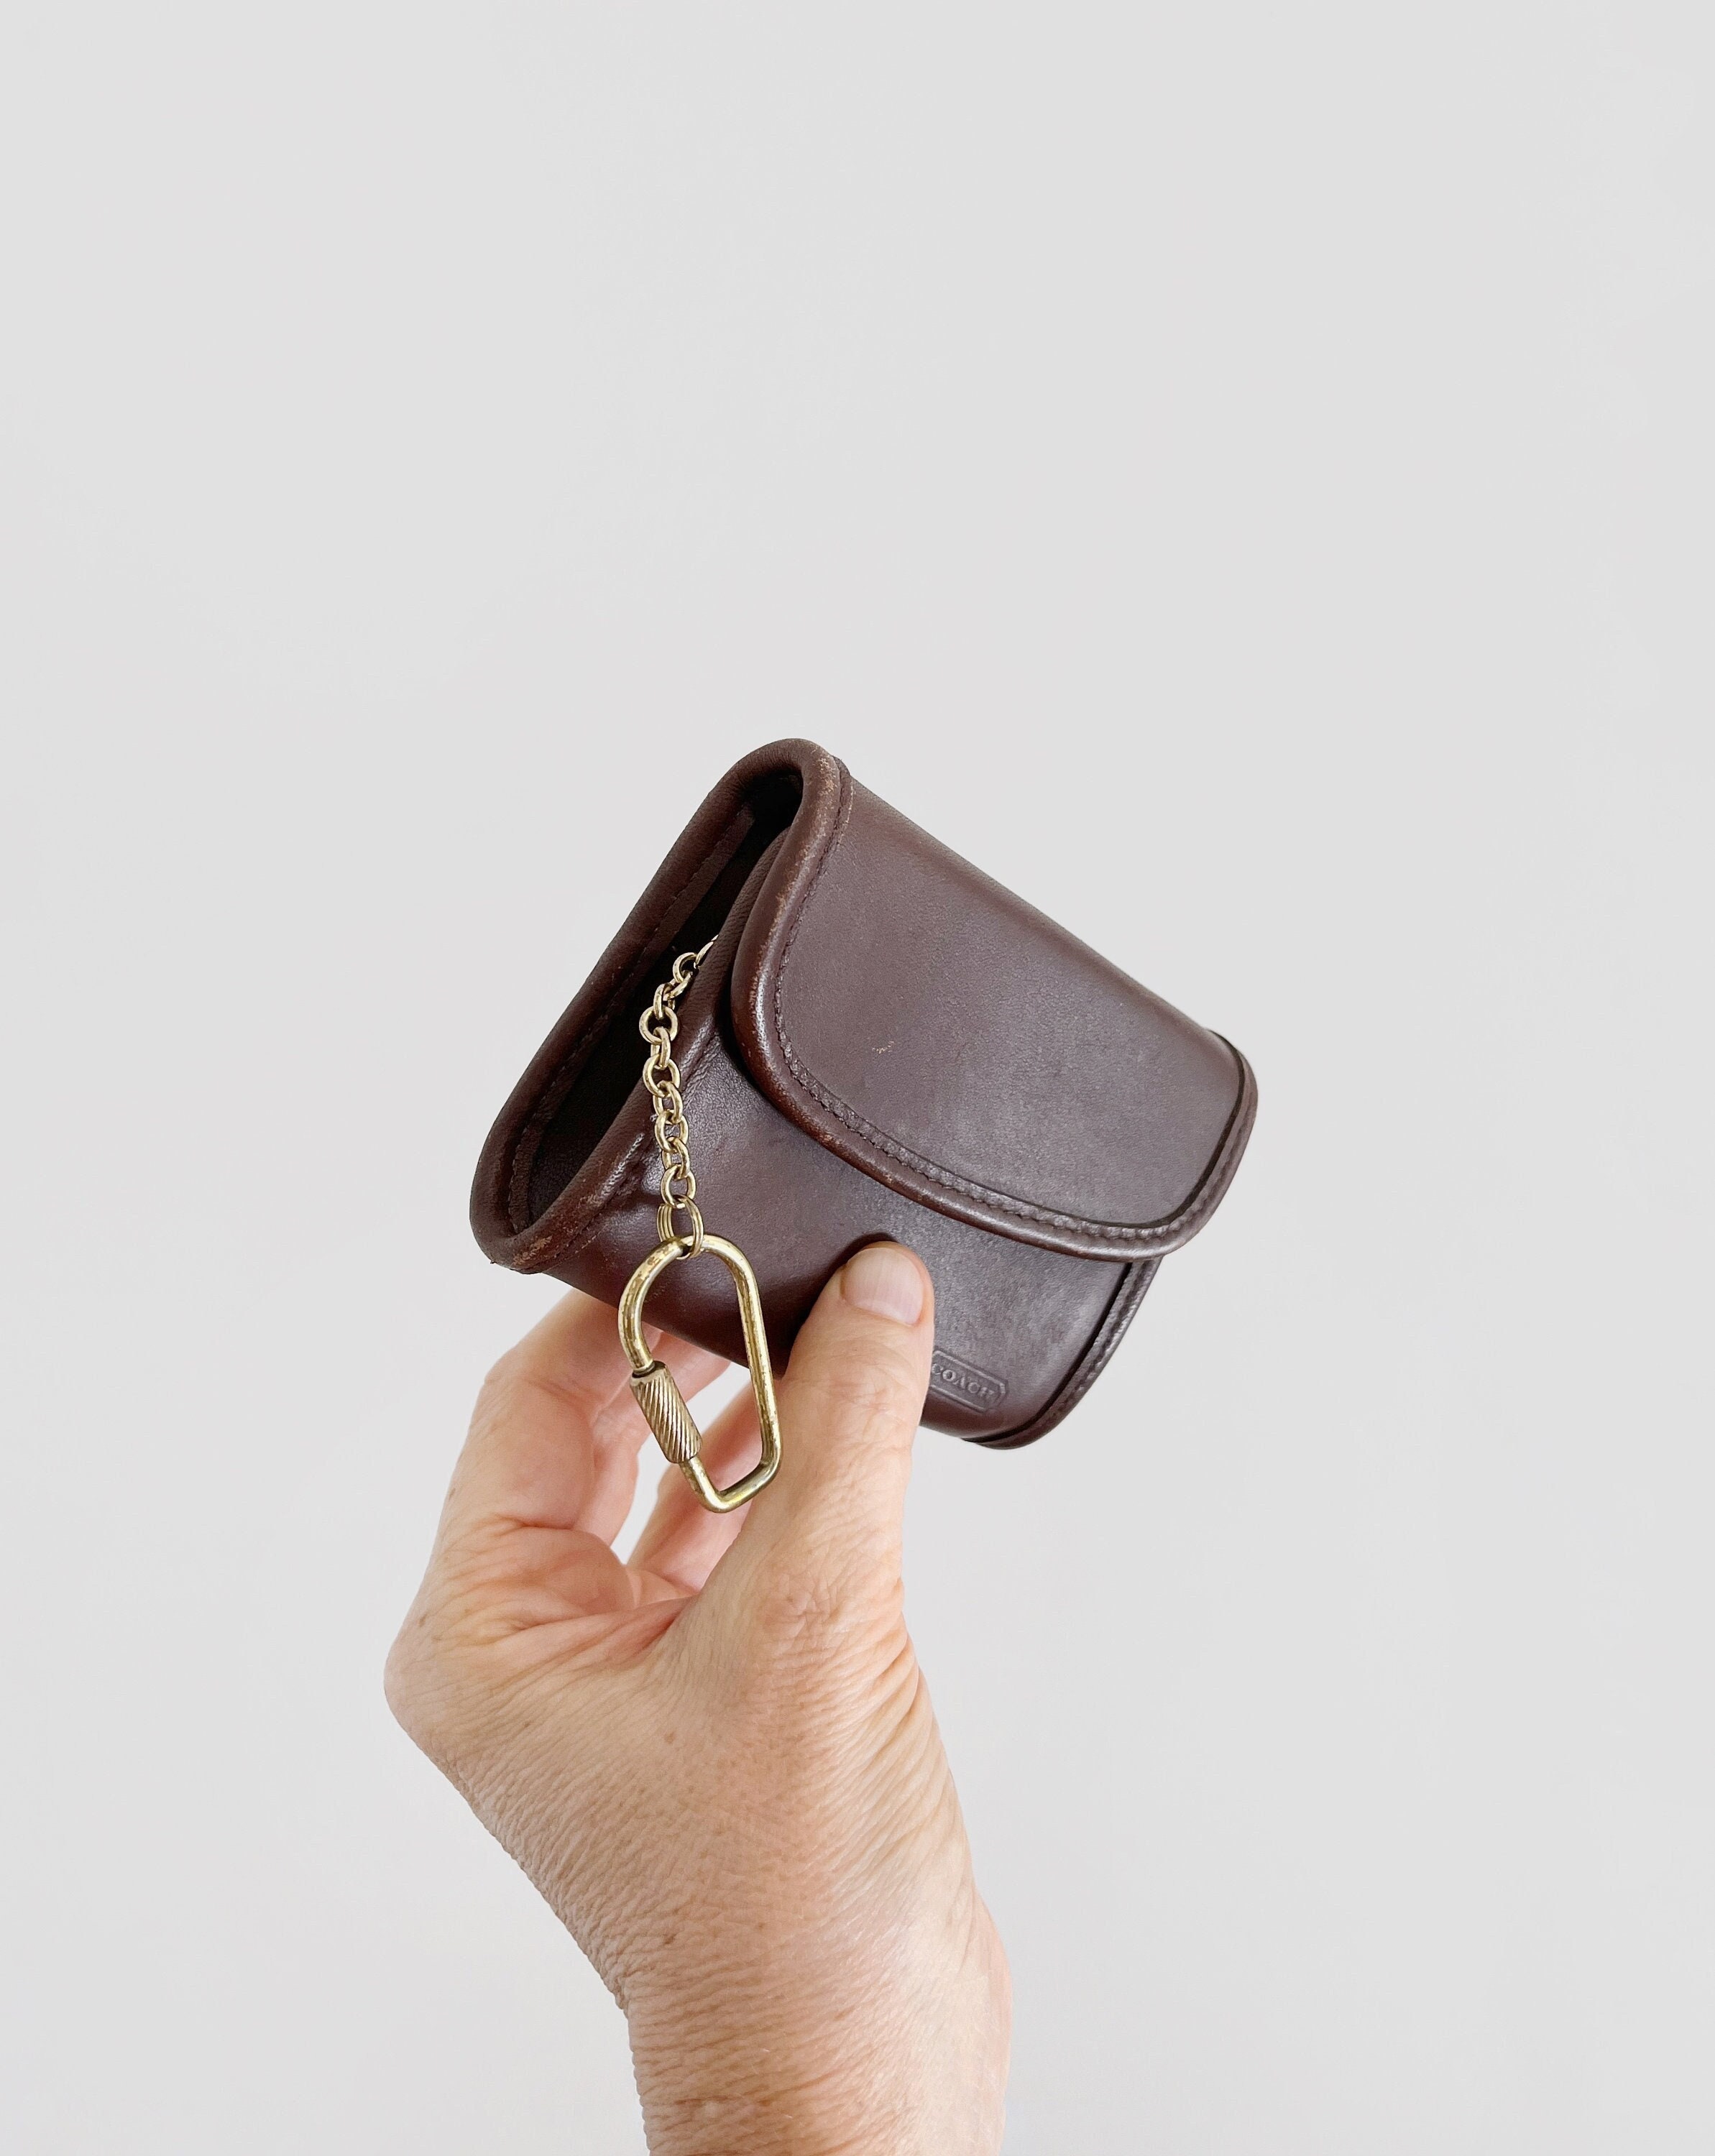 Run don't walk, my Coach Keychain Wallet is on Flash Sale for only $37, Coach  Wallet